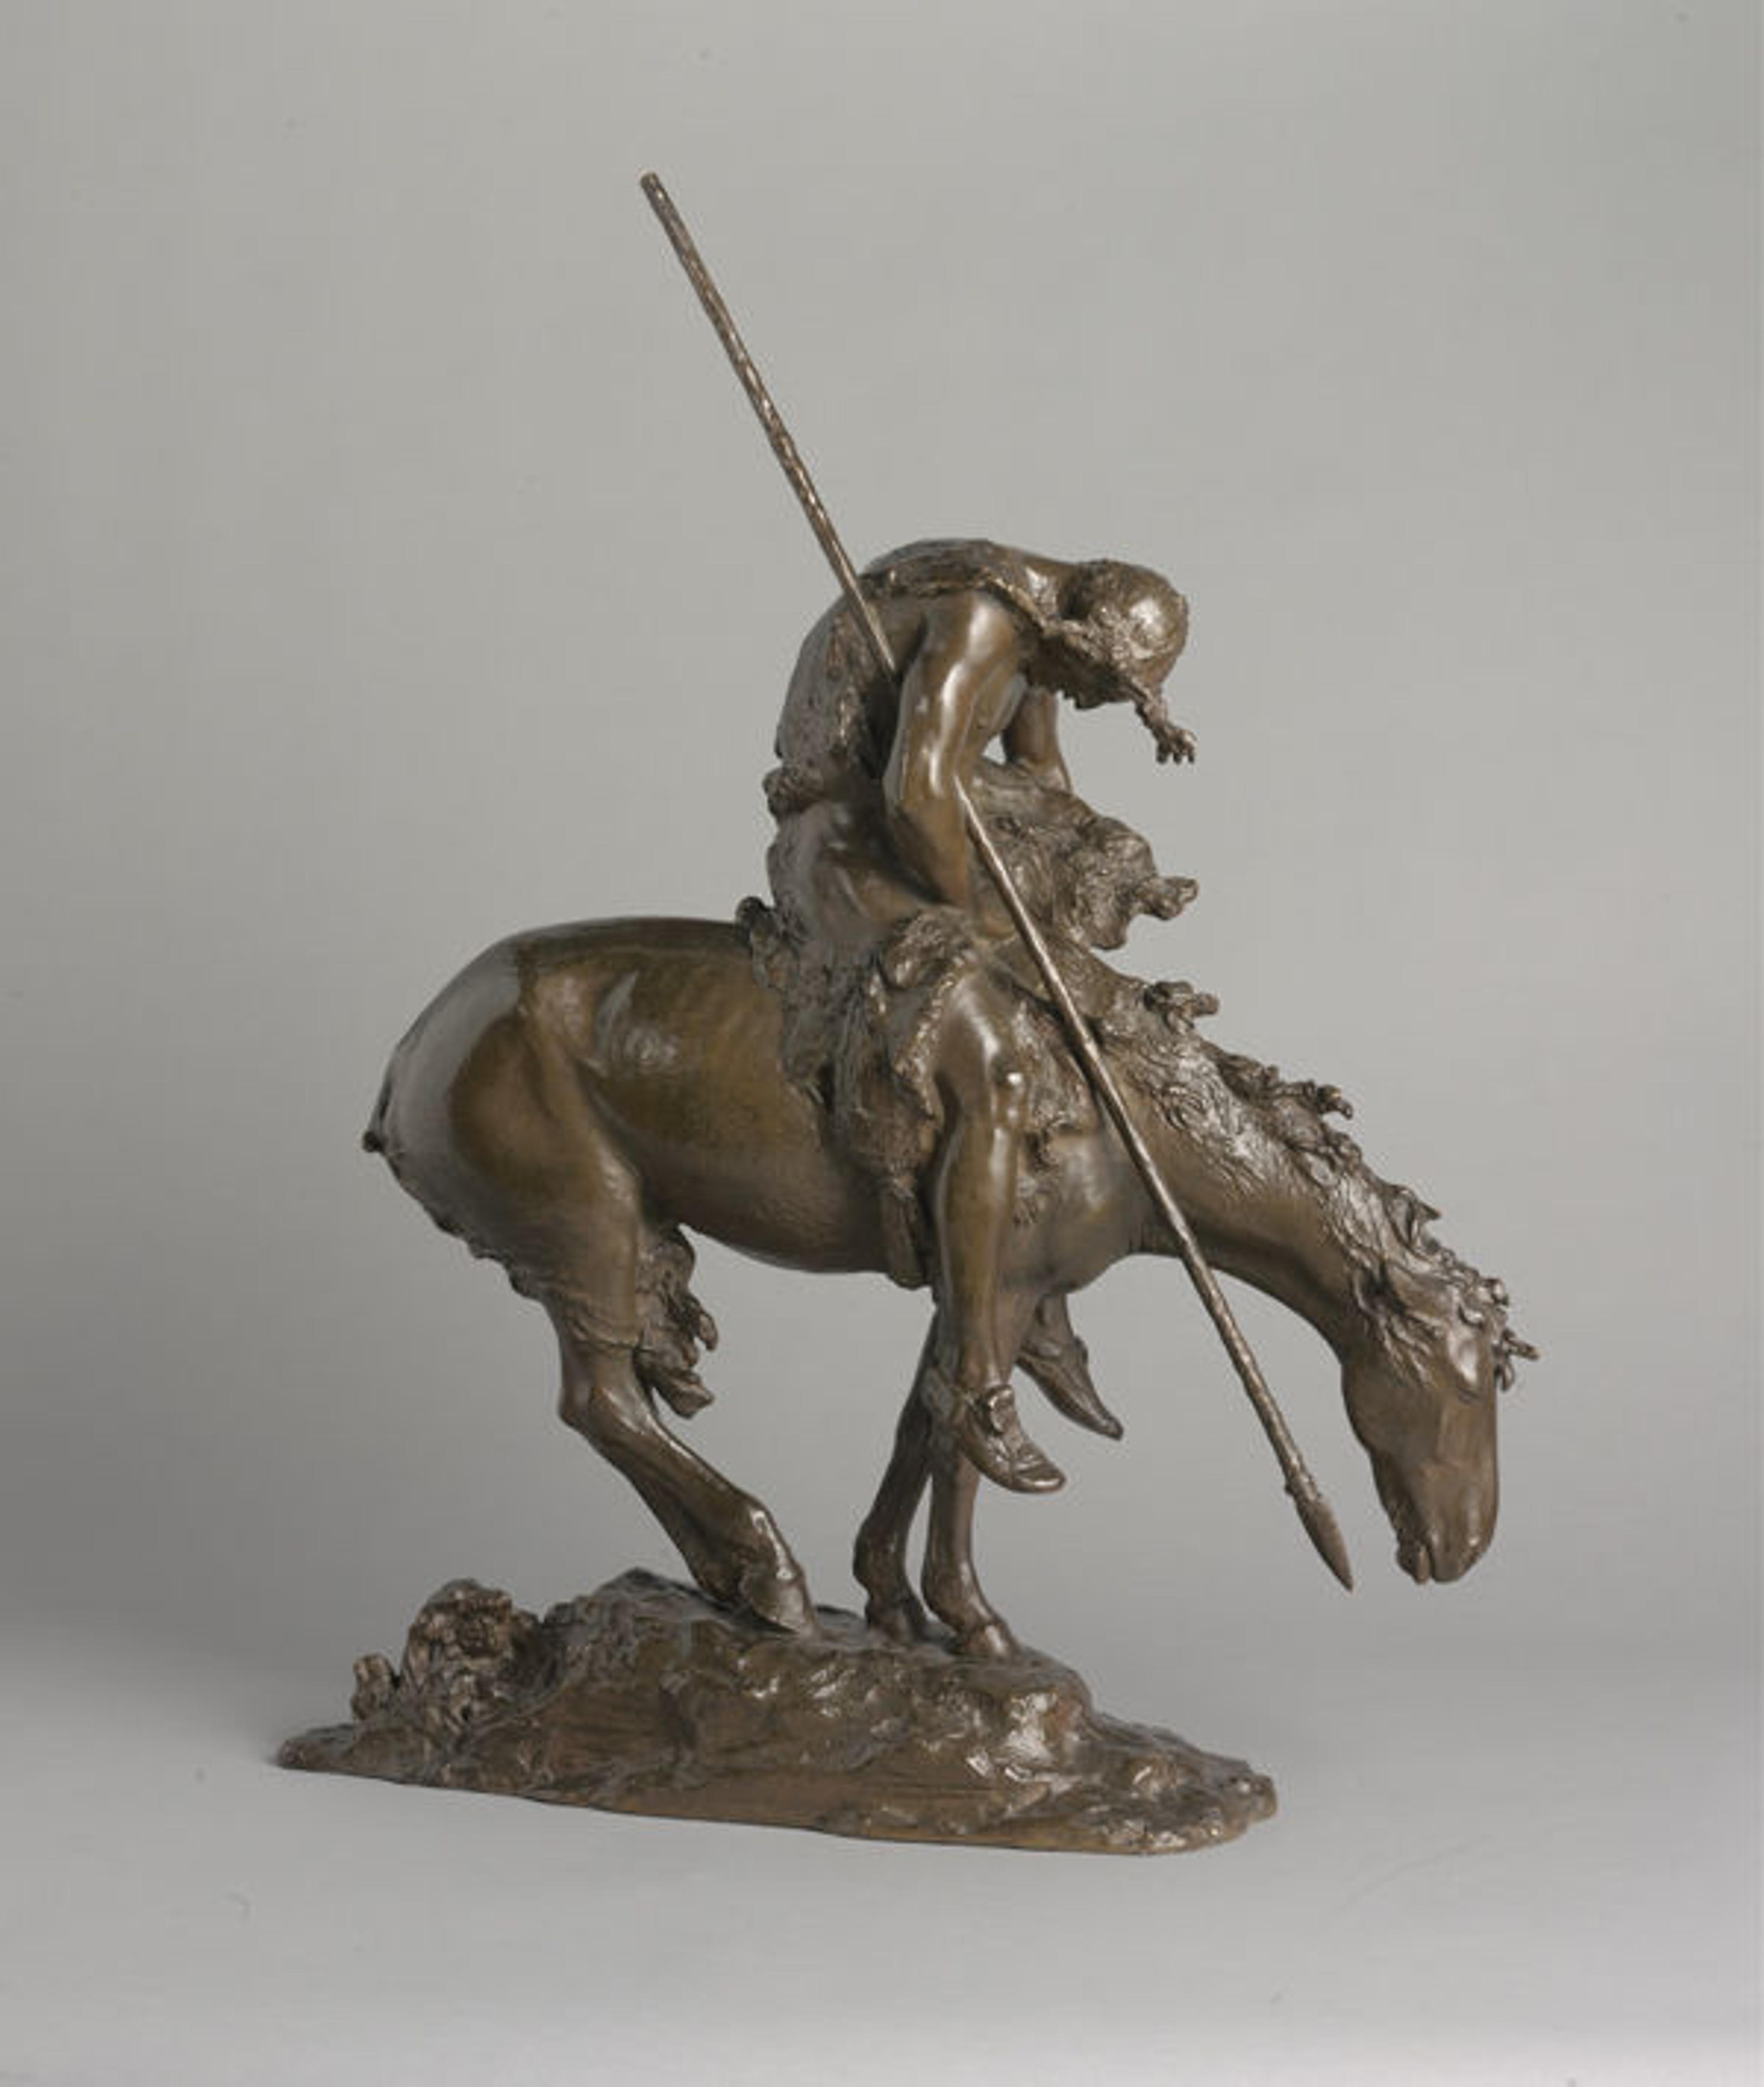 James Earle Fraser (American, 1876-1953). End of the Trail, 1918 (2010.73)